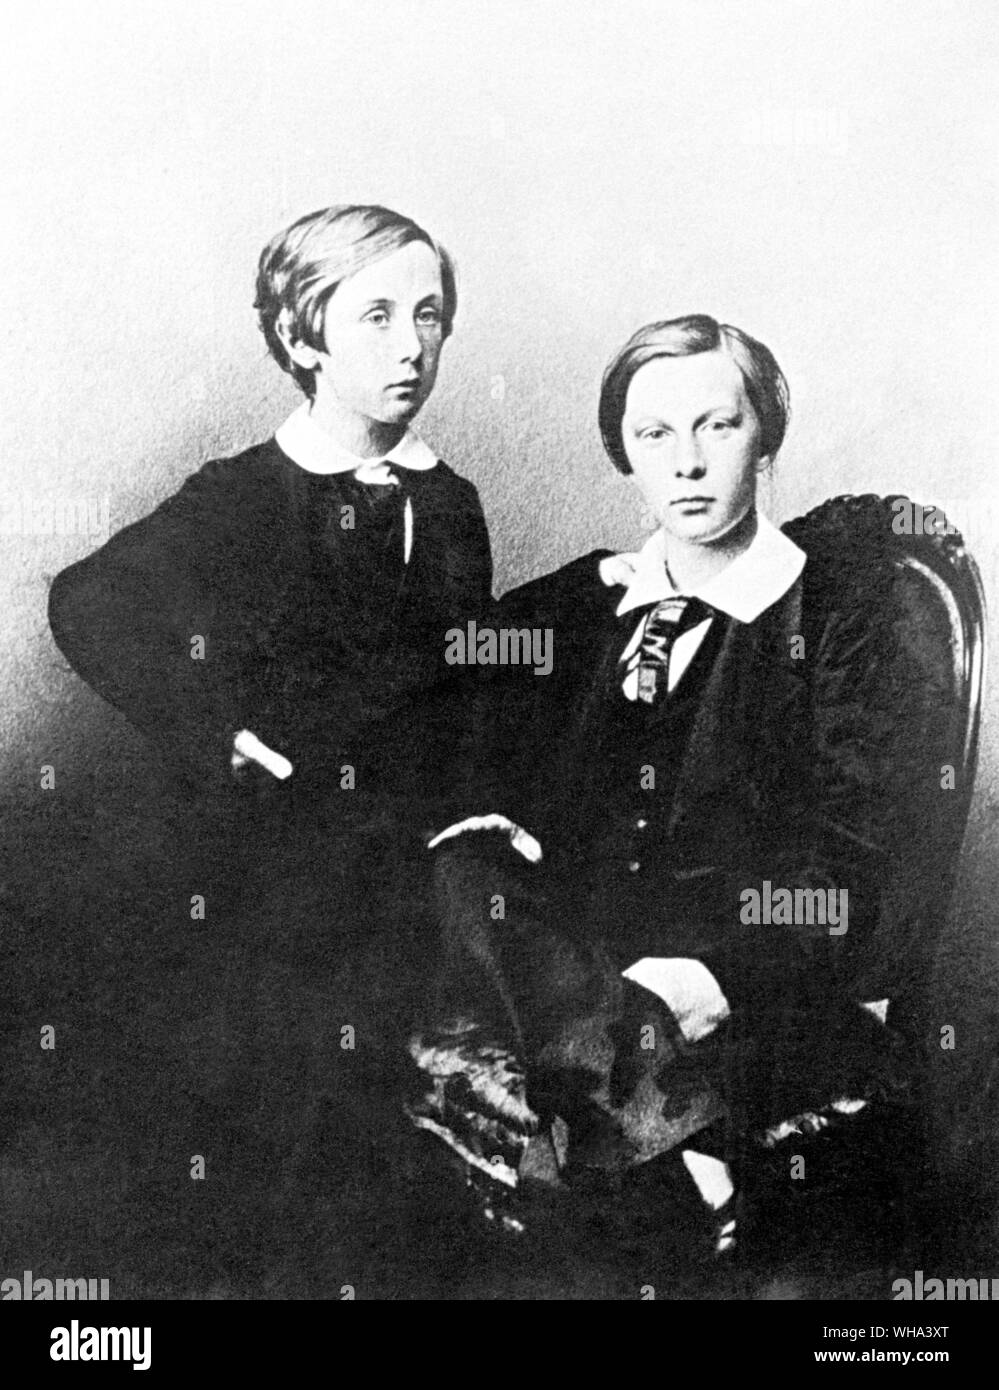 Henry Fielding and Francis Jeffrey Charles Dickens sons. . Dickens, Charles John Huffam (pseudonym Boz) English novelist. wrote novels Pickwick Papers 1836-1837, Oliver Twist 1837-1839, A Christmas Carol 1843, Bleak House 1852-1853, A Tale of Two Cities 1859  1812-1870 . . Stock Photo